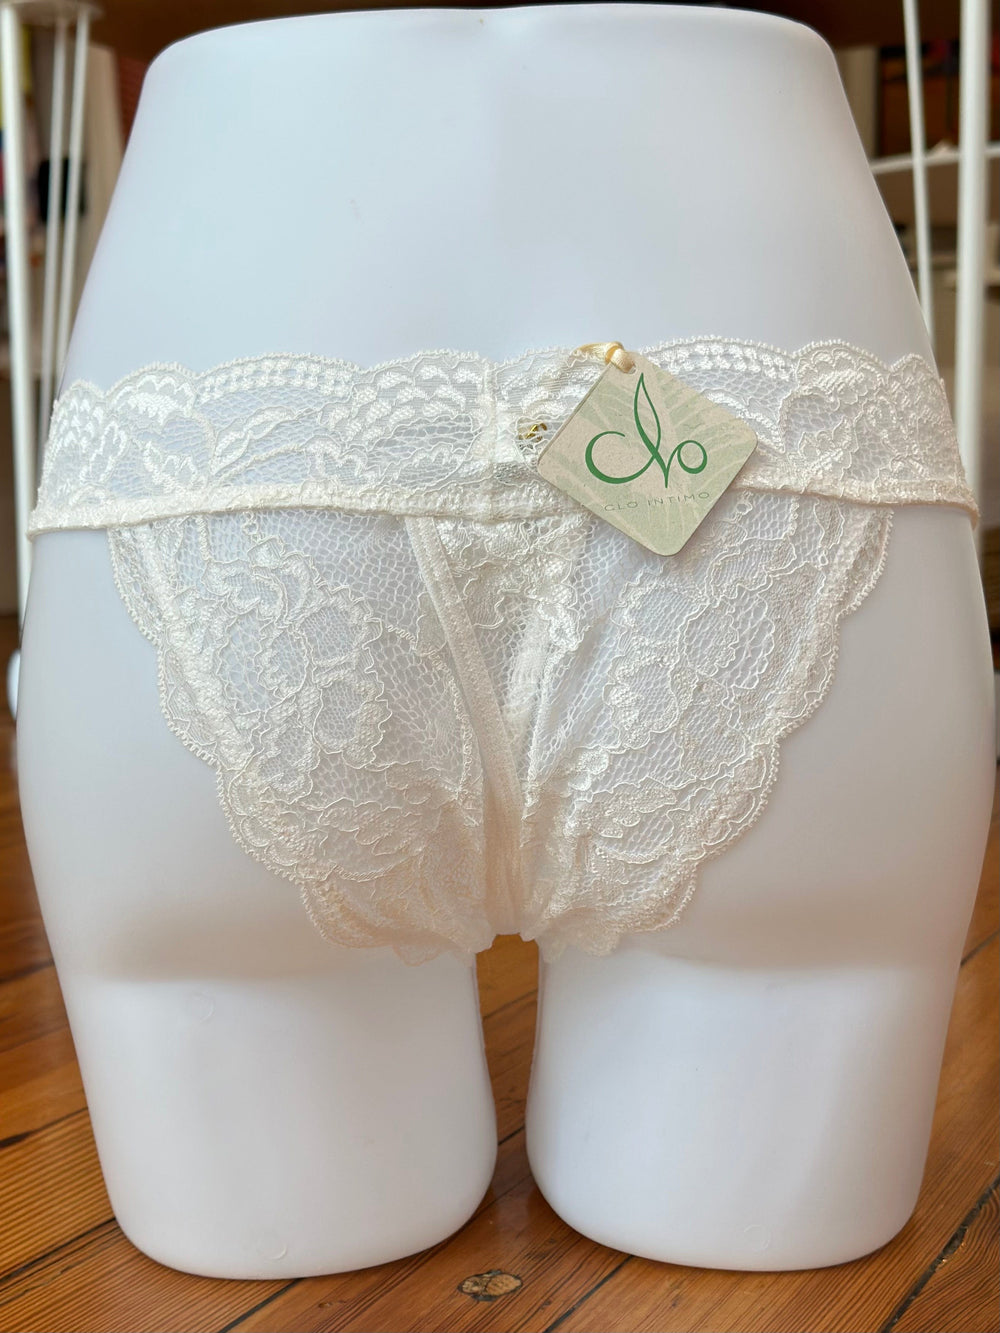 Clo Intimo thong CLO intimo Fortuna Lace Abierto Thong